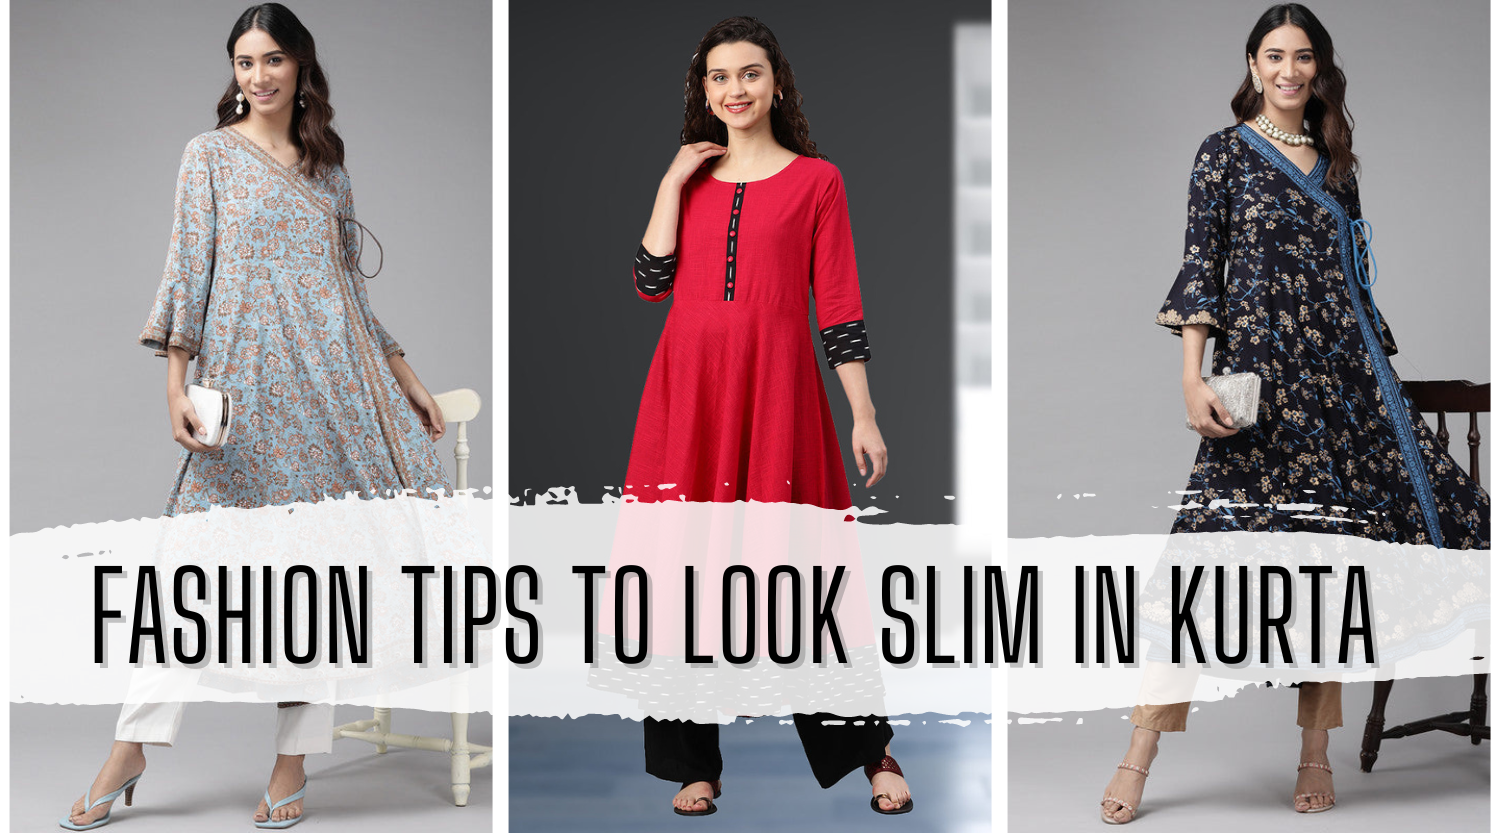 11 Different Types of Bottom wear To Wear with Kurtis - LooksGud.com |  Salwar designs, How to wear, Clothes for women